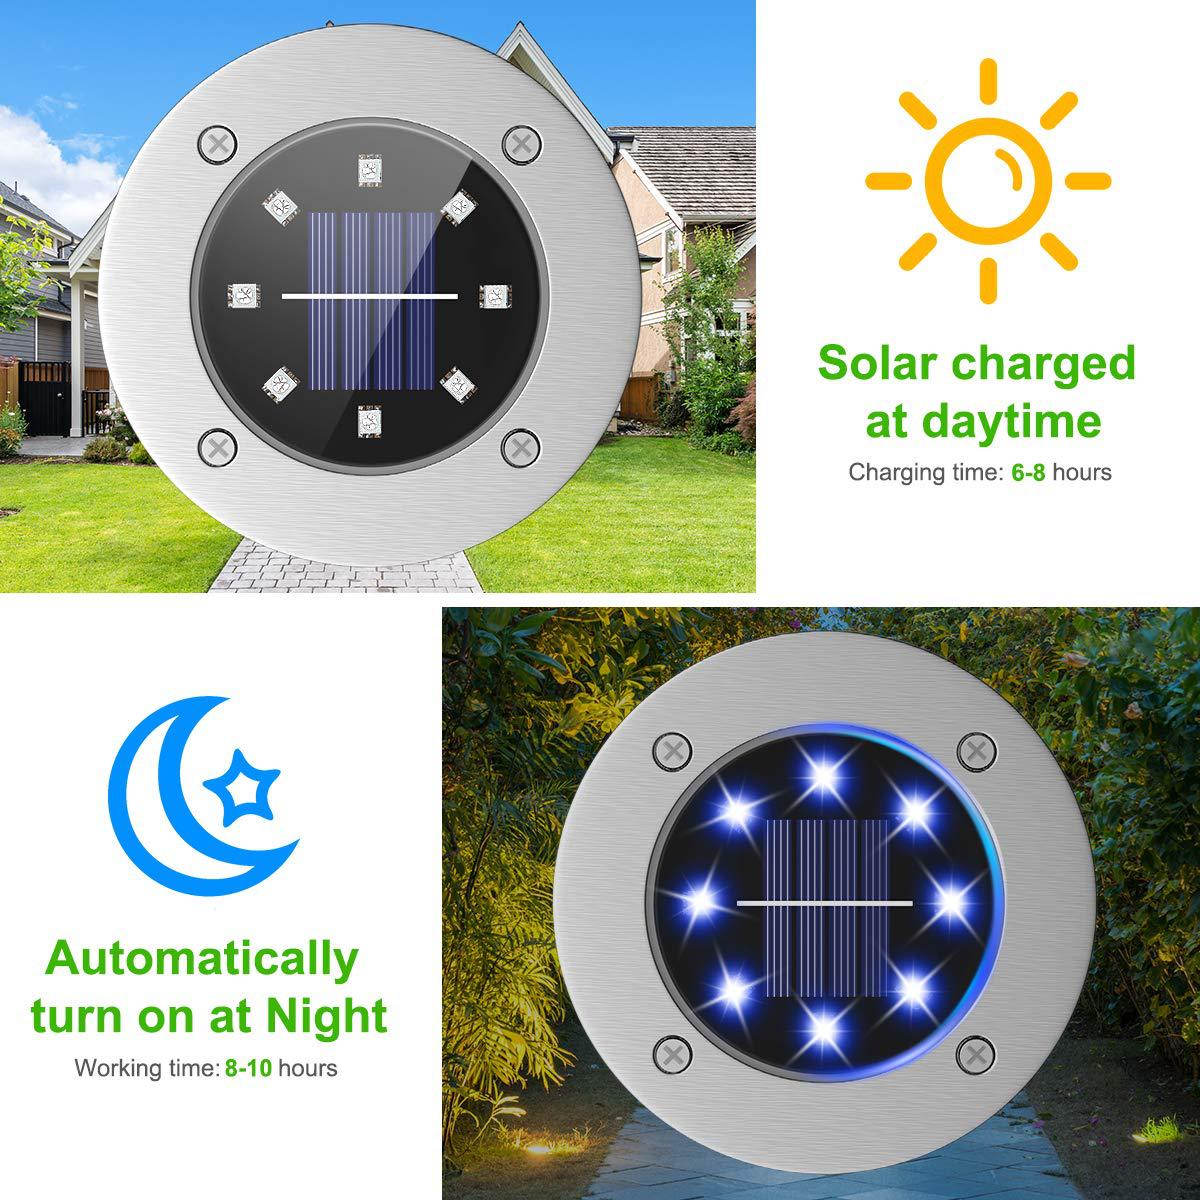 Colorful-Conversion-LED-Lawn-Lights-RGB-Solar-Stainless-Steel-8LED-Underground-Light-Garden-Lawn-Dec-1816608-9